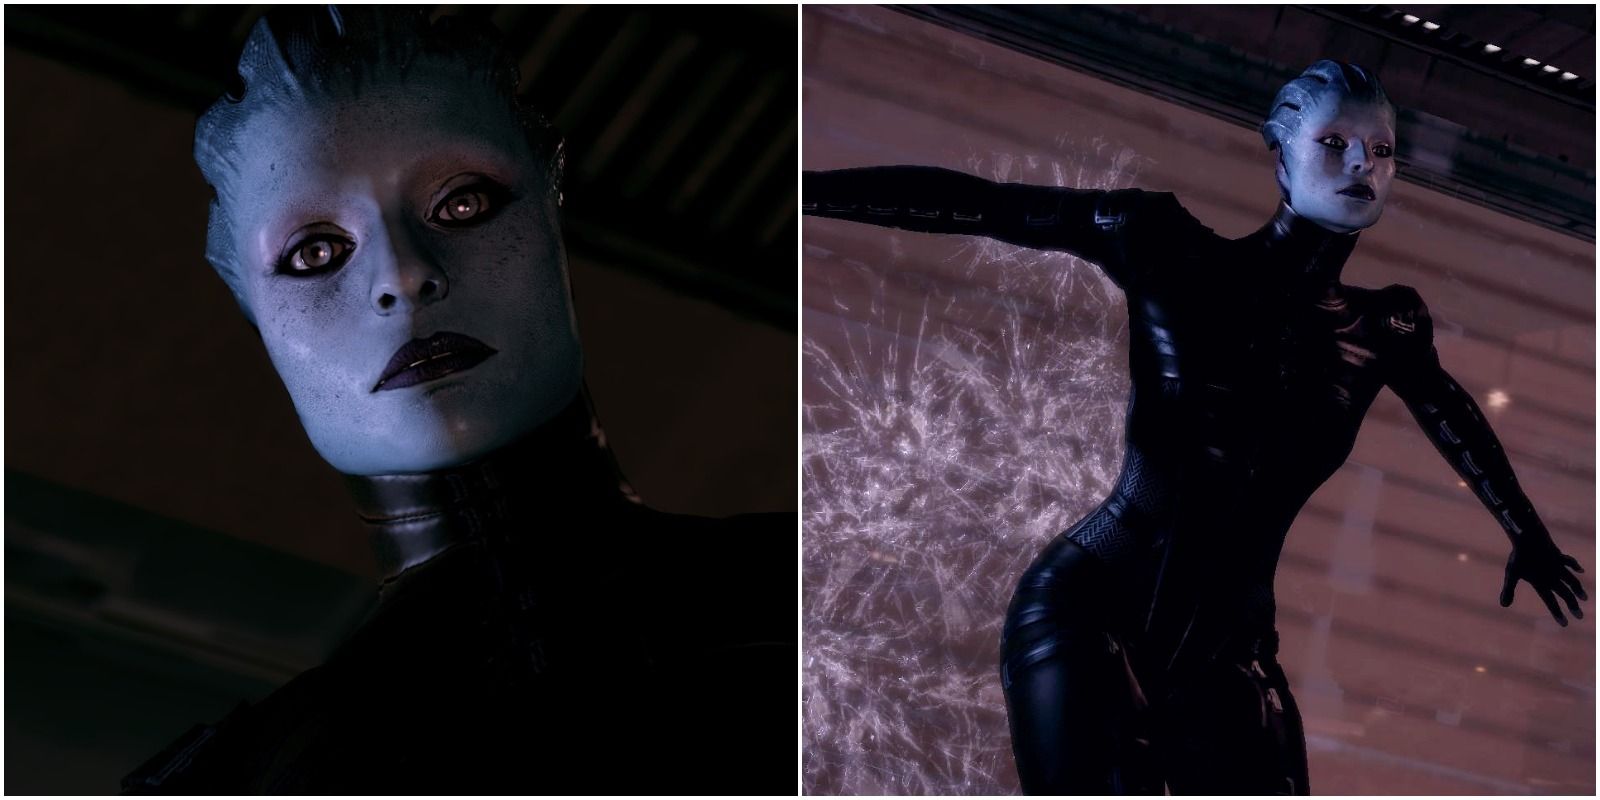 Side by side images of Morinth from Mass Effect